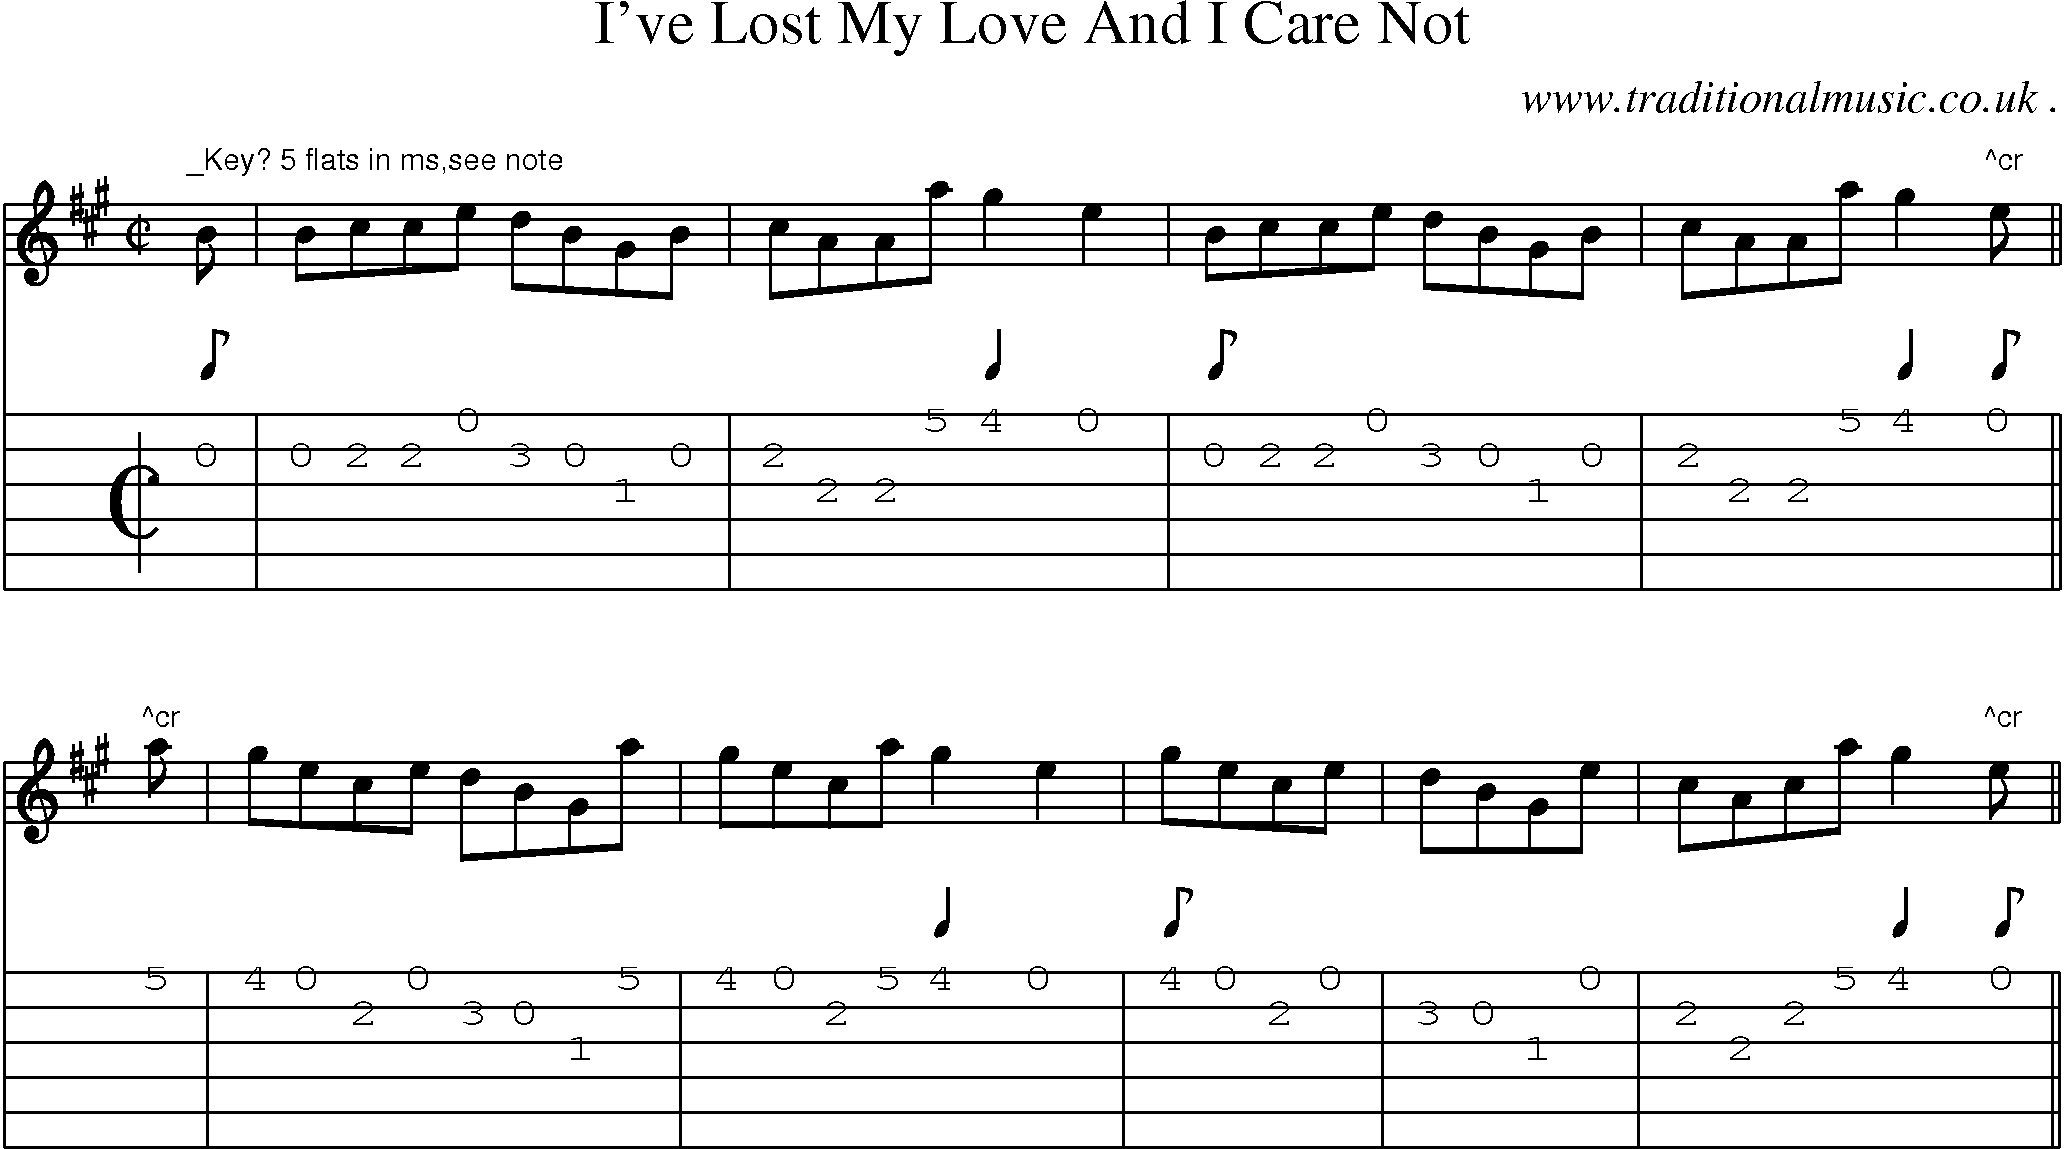 Sheet-Music and Guitar Tabs for Ive Lost My Love And I Care Not